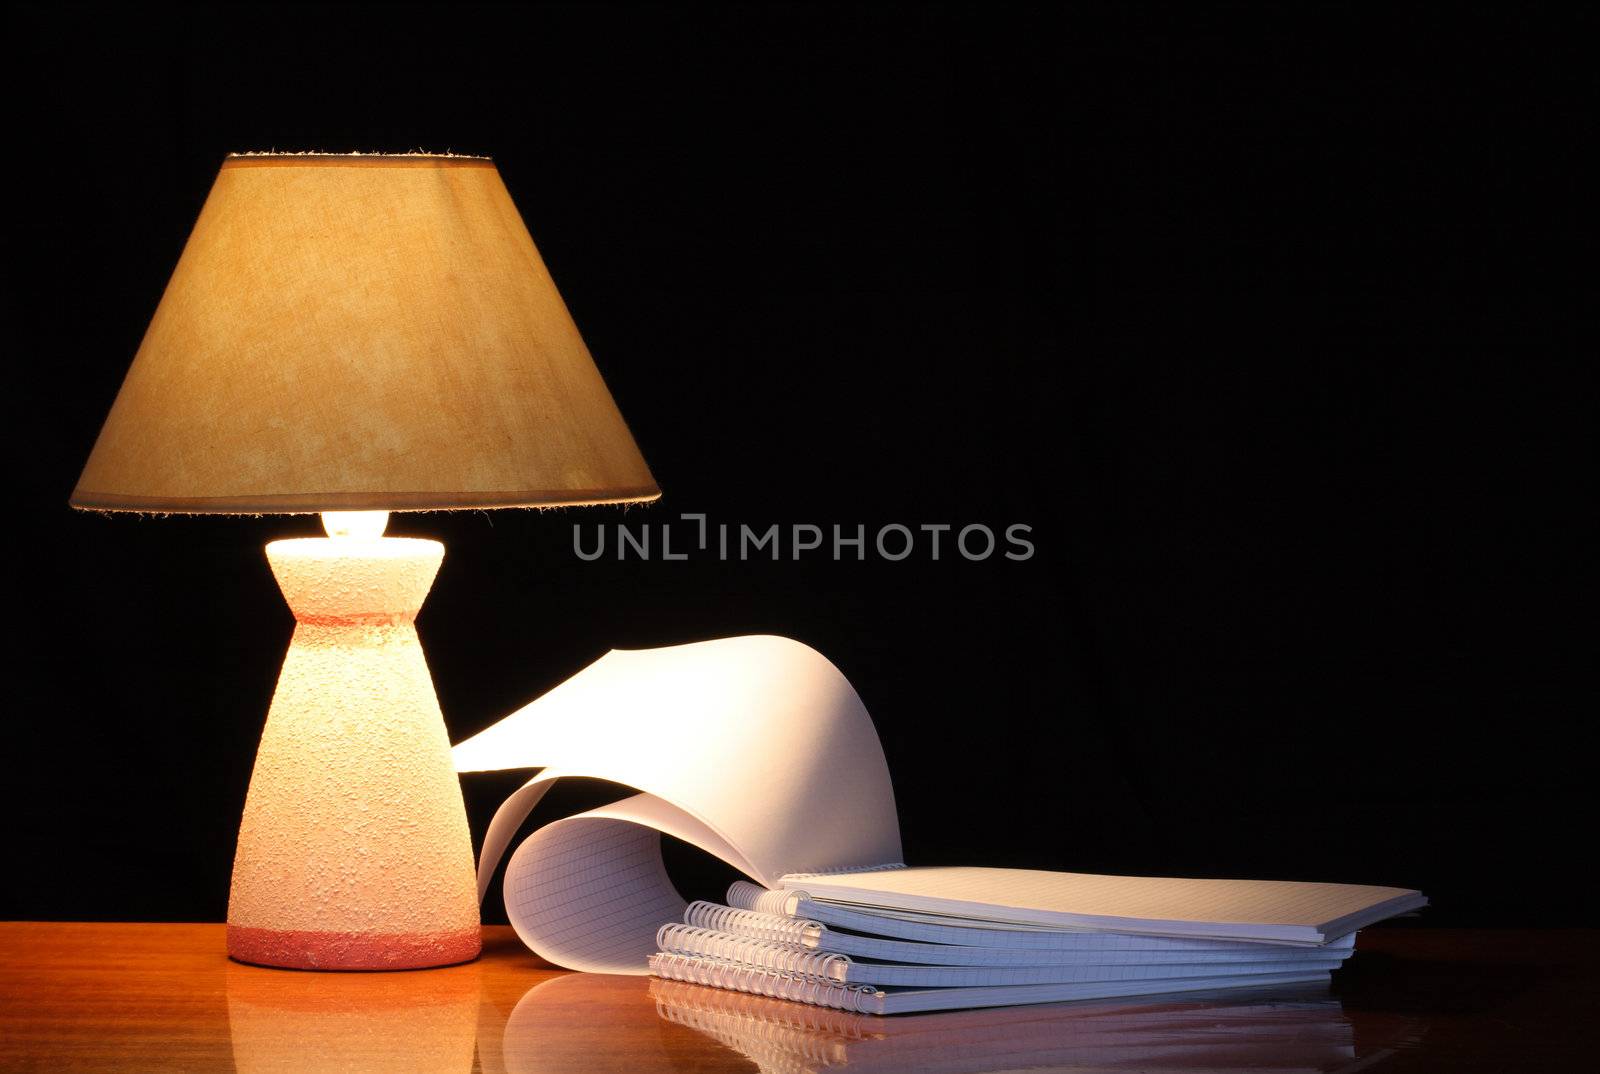 Vintage table lamp with shade near open spiral notebooks on dark background